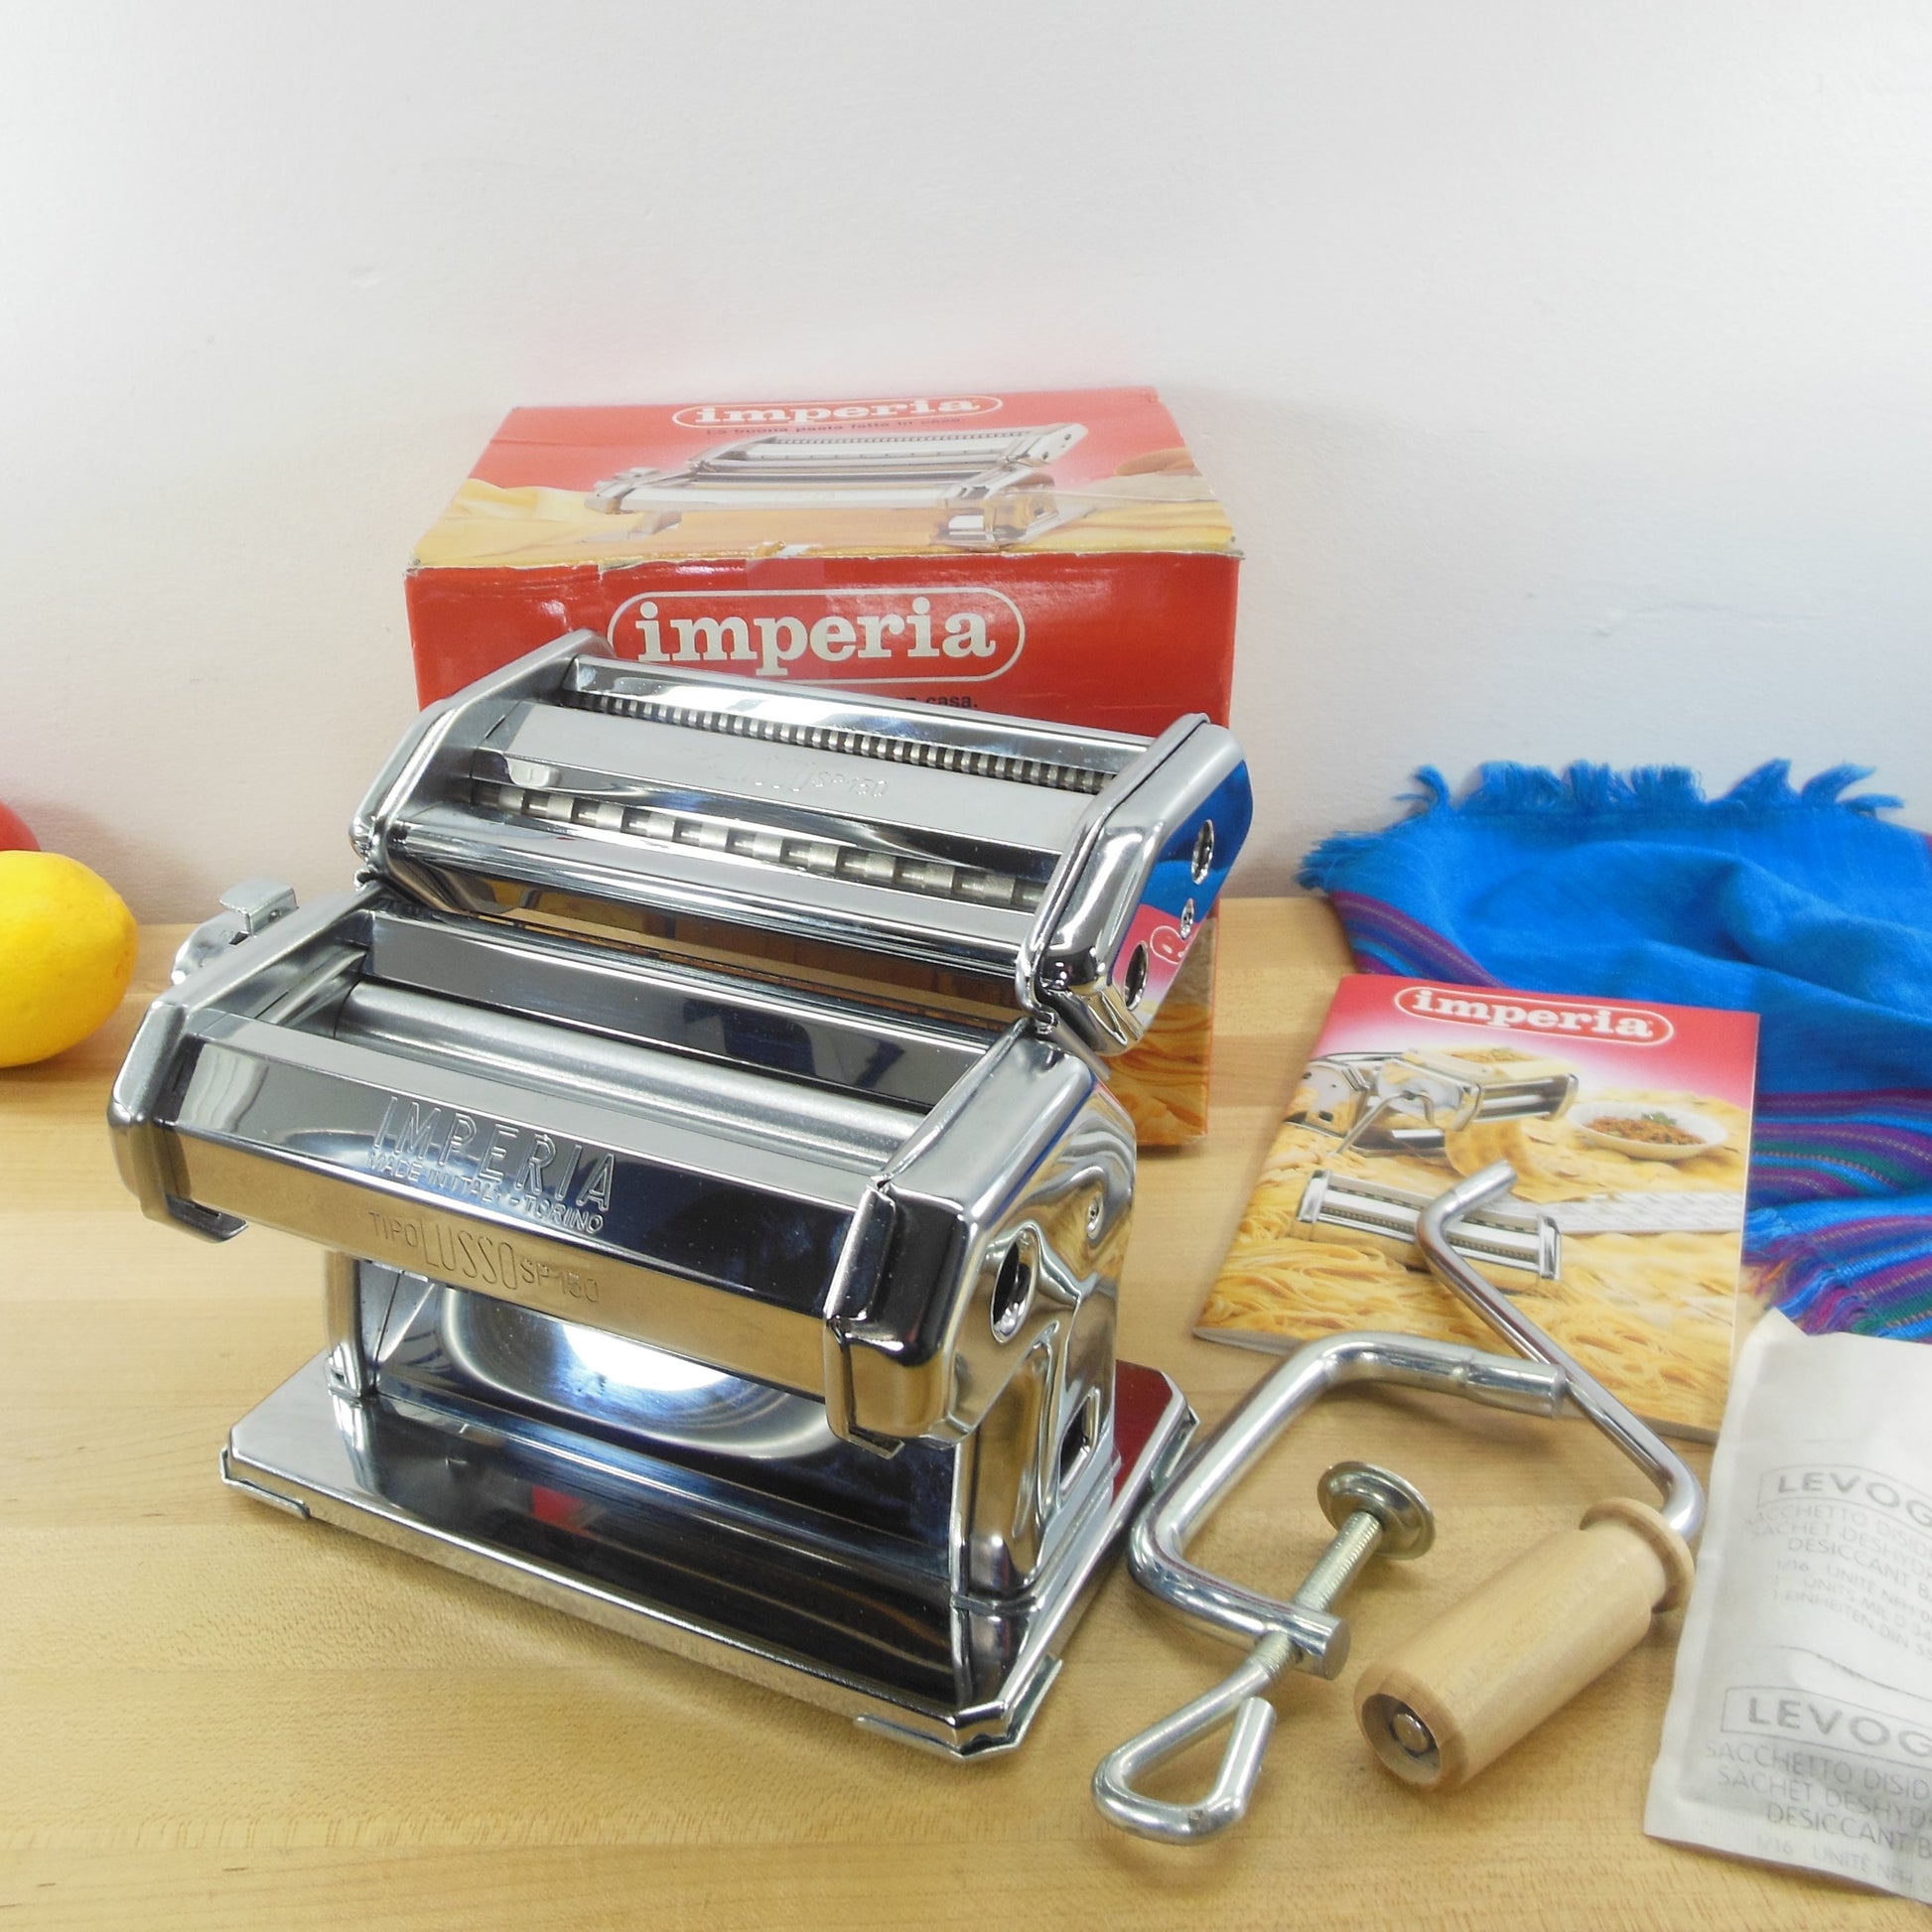 Italy SP/150 Manual Pasta Maker Machine – Olde Kitchen & Home